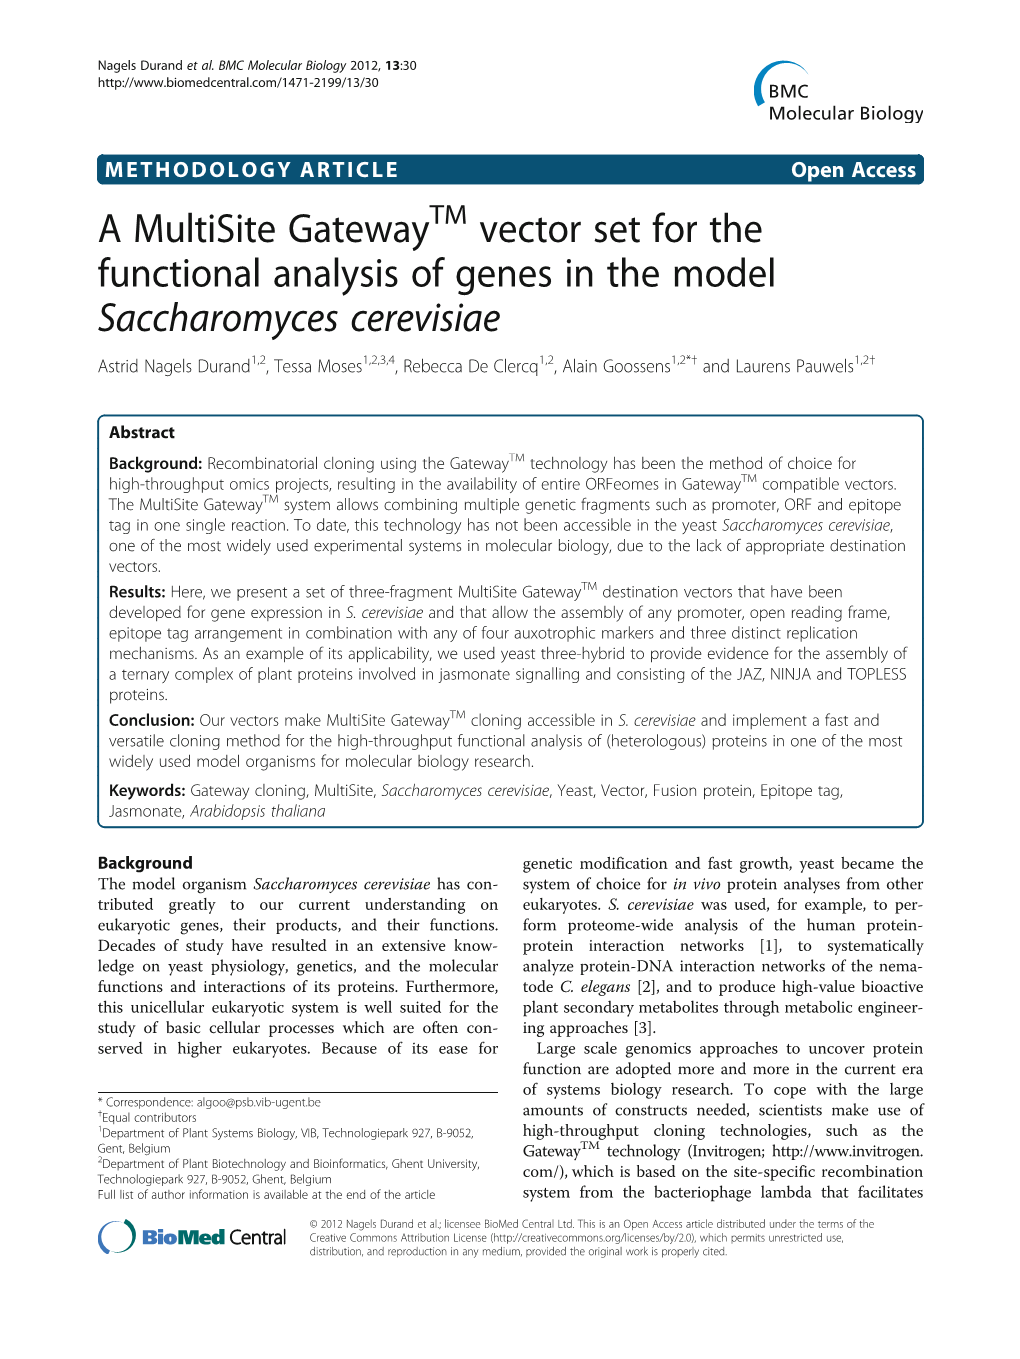 A Multisite Gateway Vector Set for the Functional Analysis of Genes in The